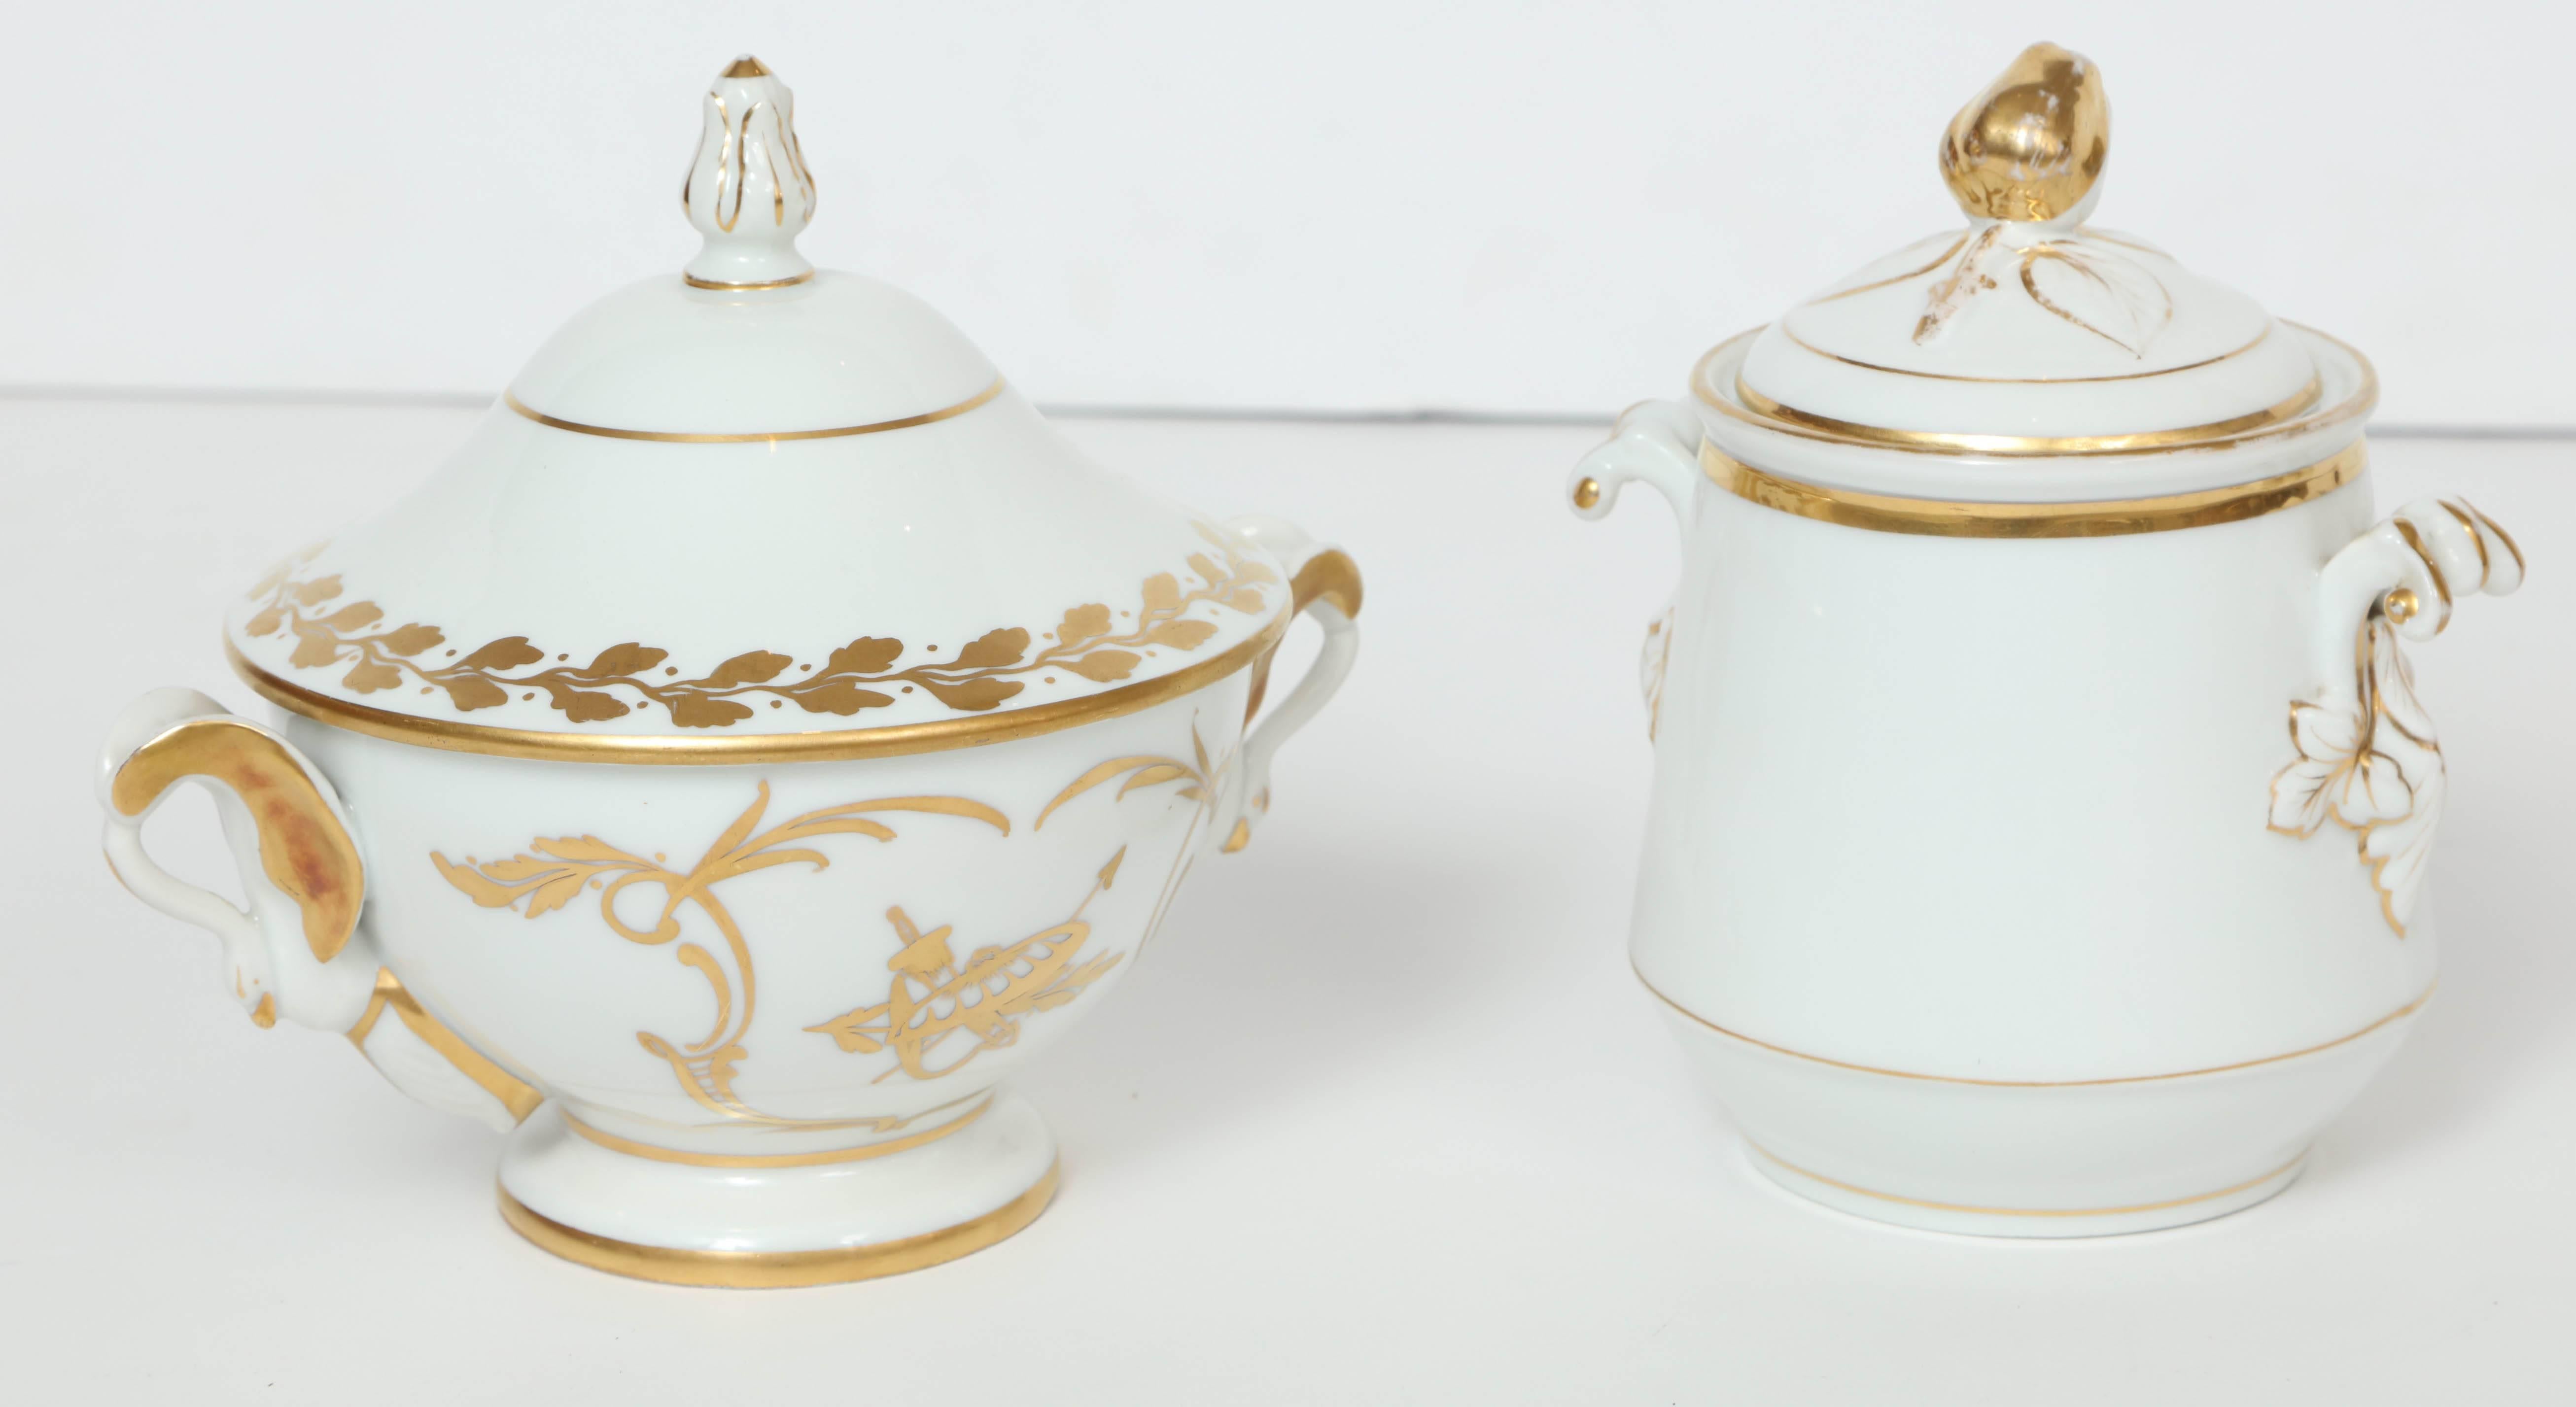 Set of two white porcelain serving pots with 22-karat gold decoration. Perfectly sized for serving jam, jelly, compote, sauces or sugar. 

Bowl on left measures: 7.5